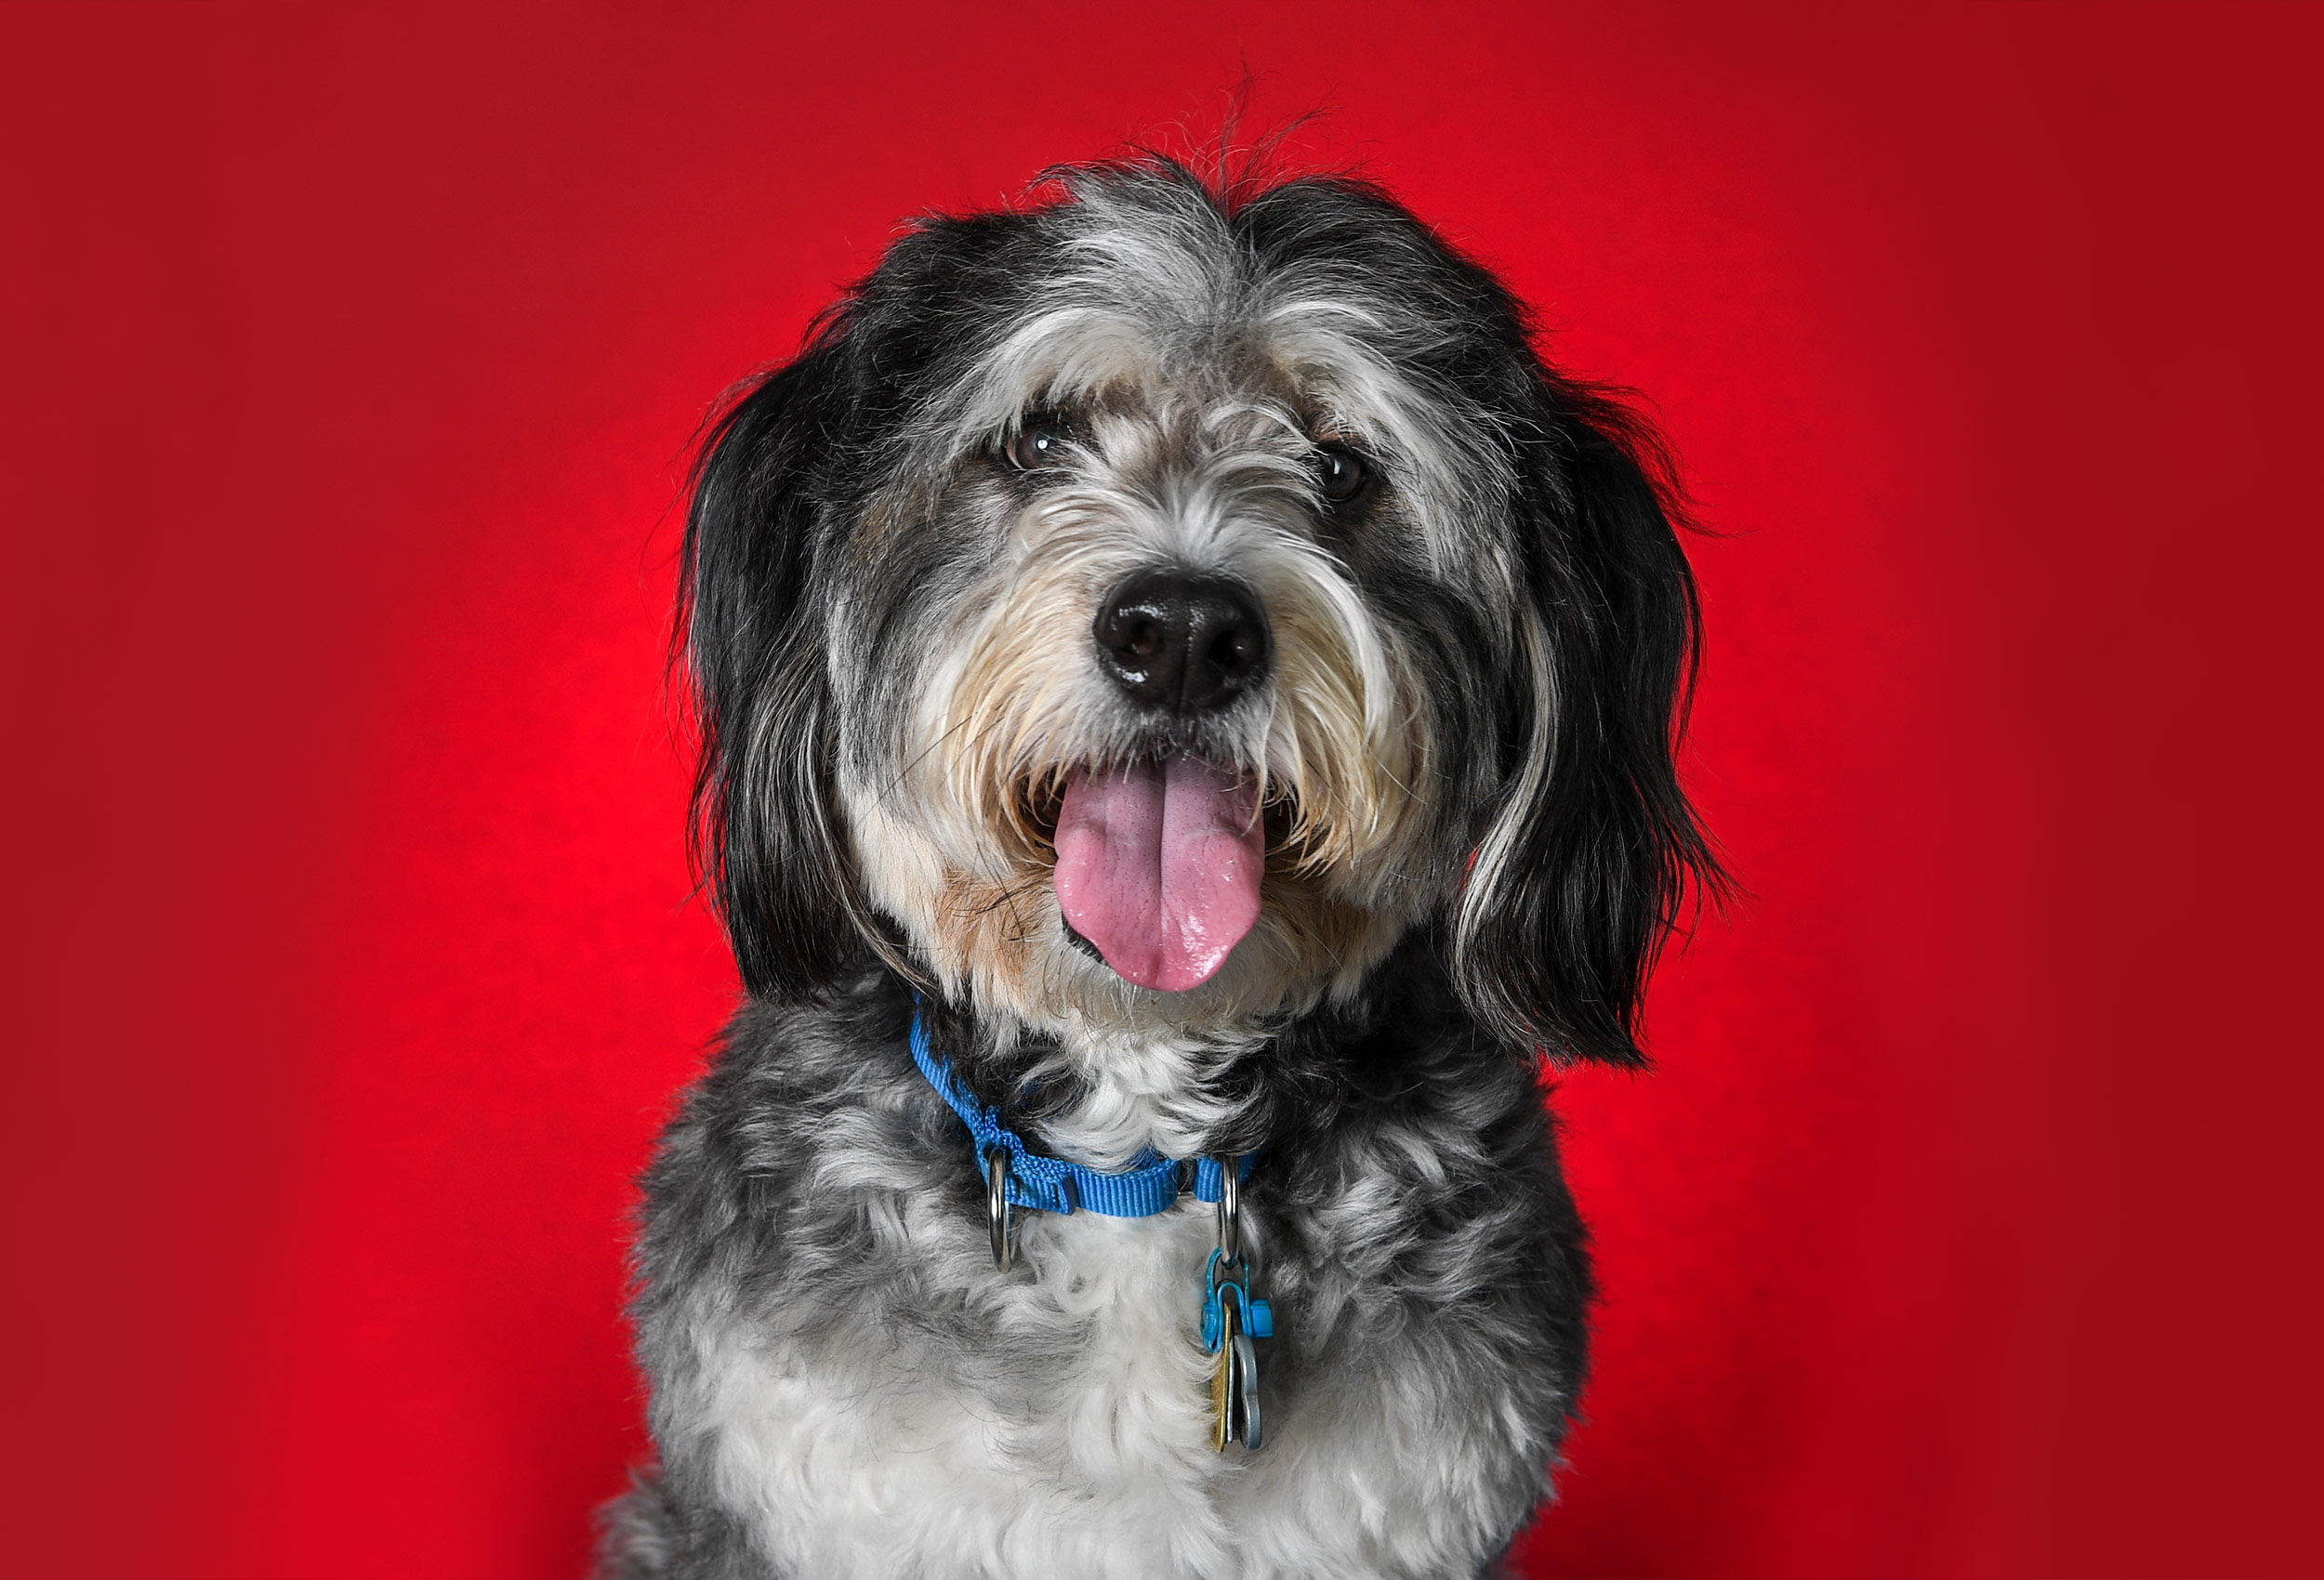 Brody the Bernedoodle dog studio portrait on red background